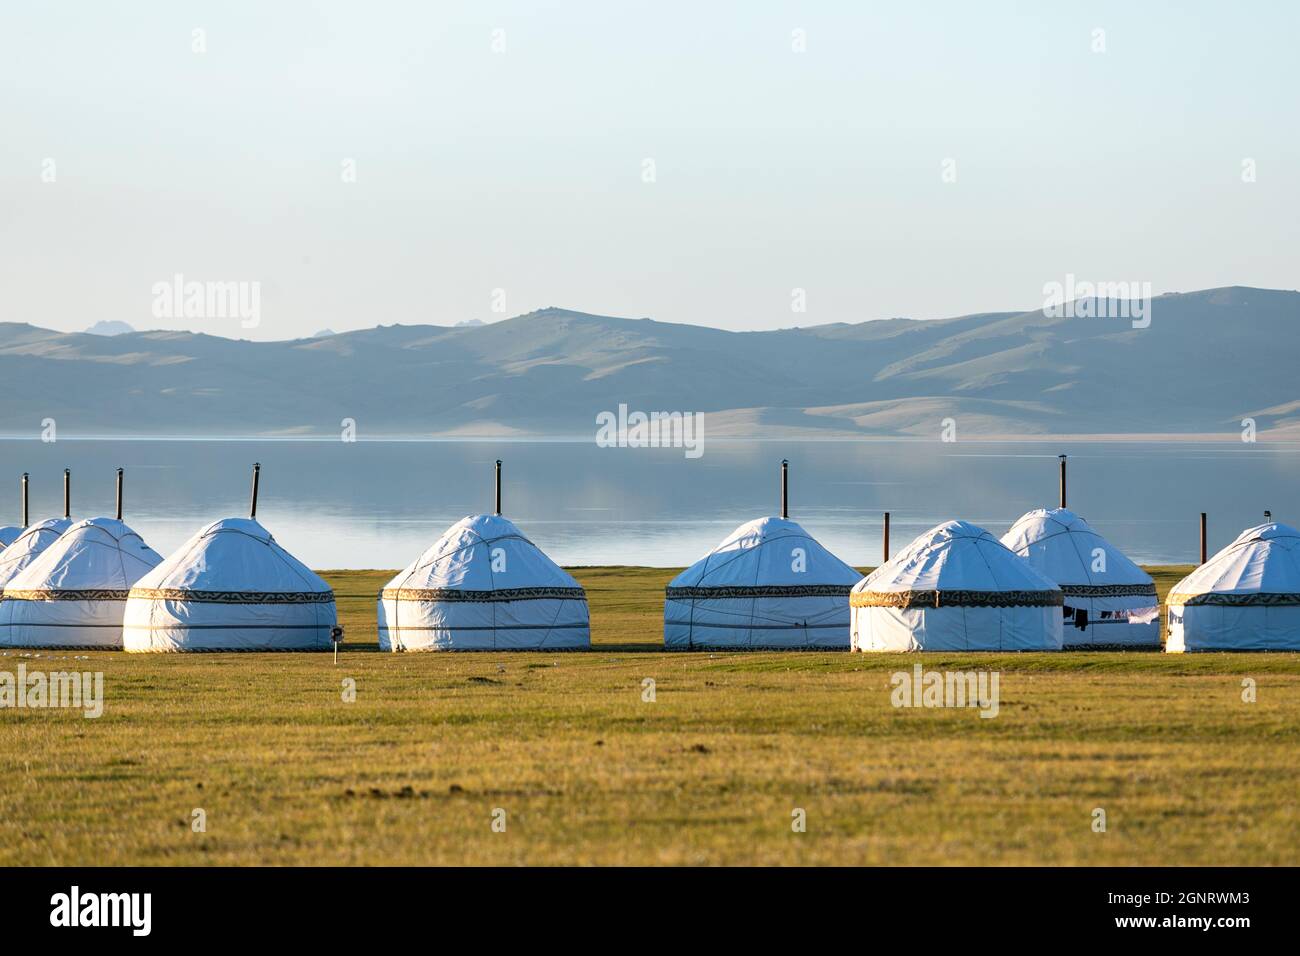 Traditional Central Asia nomad yurts on the lake shore Stock Photo